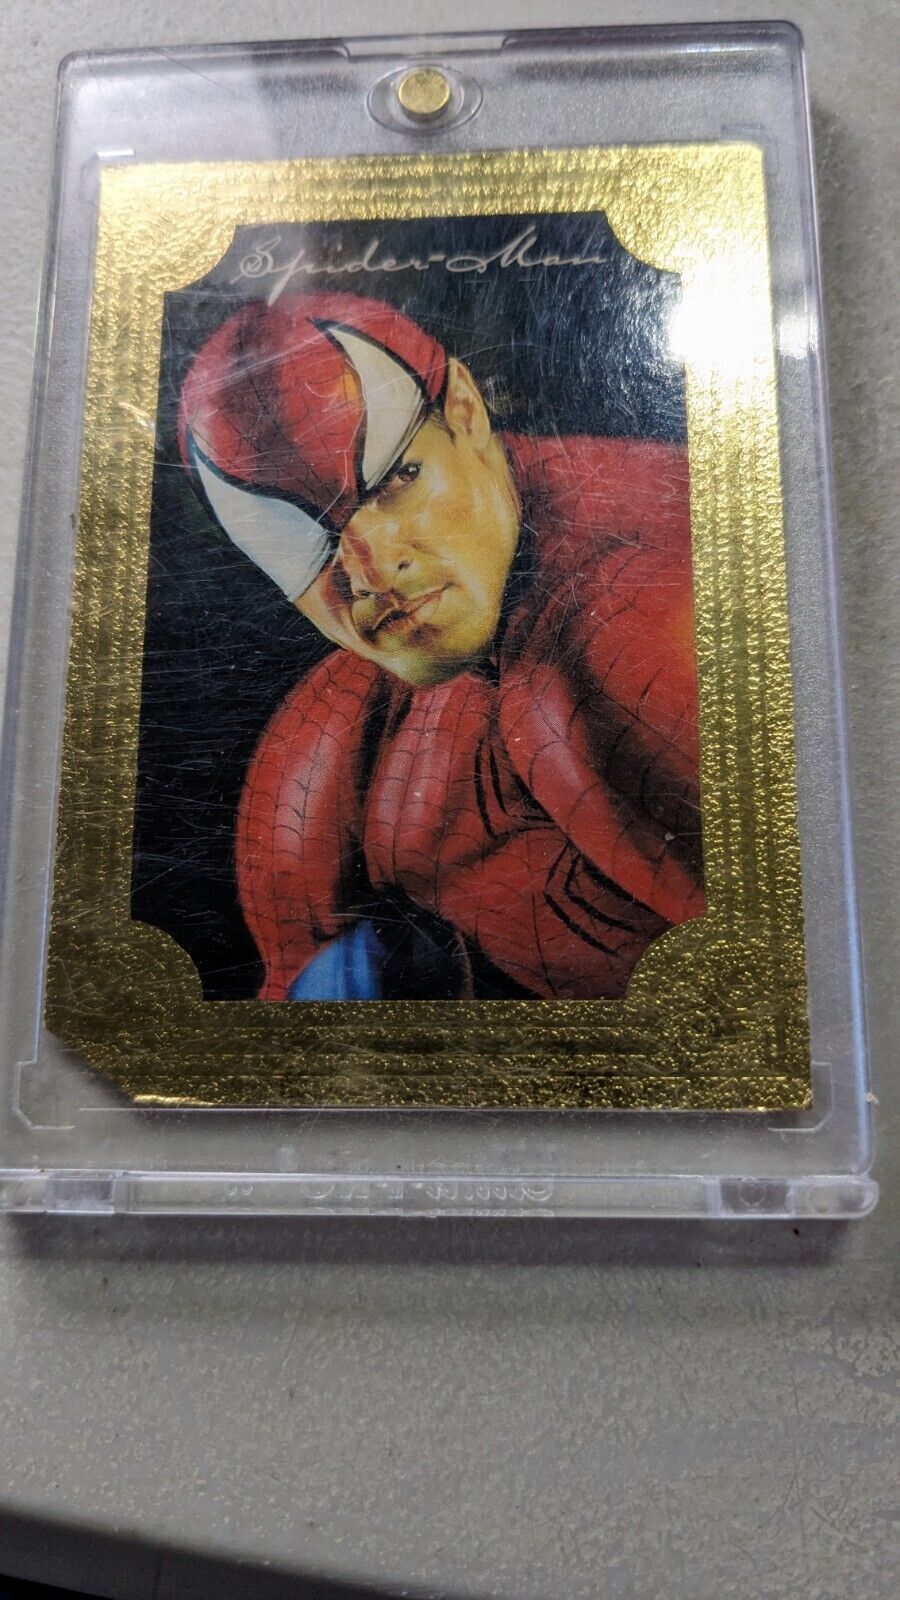 1996 Marvel Masterpieces Spider-Man Gold Gallery #5 of 6 Die Cut Promo Card Rare